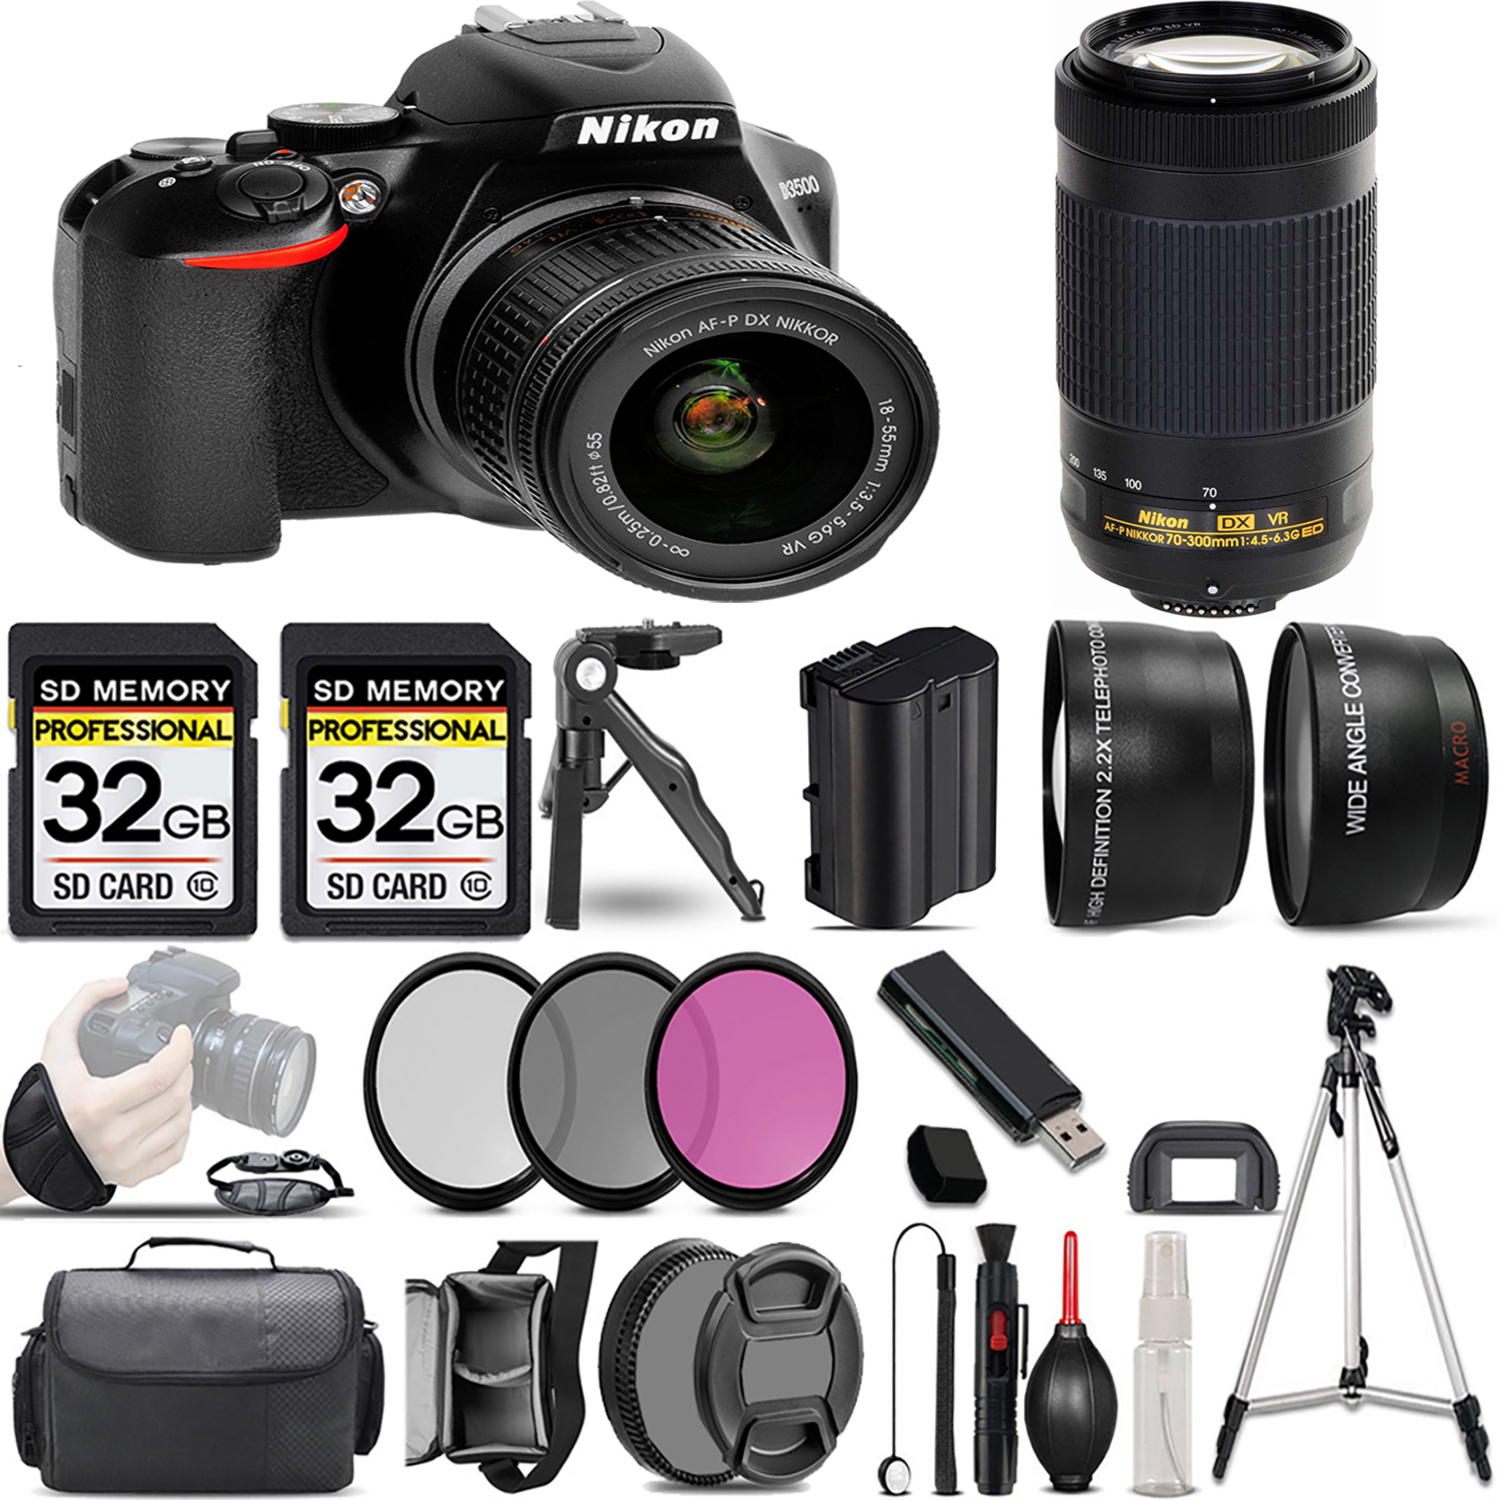 D3500 DSLR Camera with 18-55mm Lens + 70- 300mm VR Lens + 3 Piece Filter Set + 64GB *FREE SHIPPING*